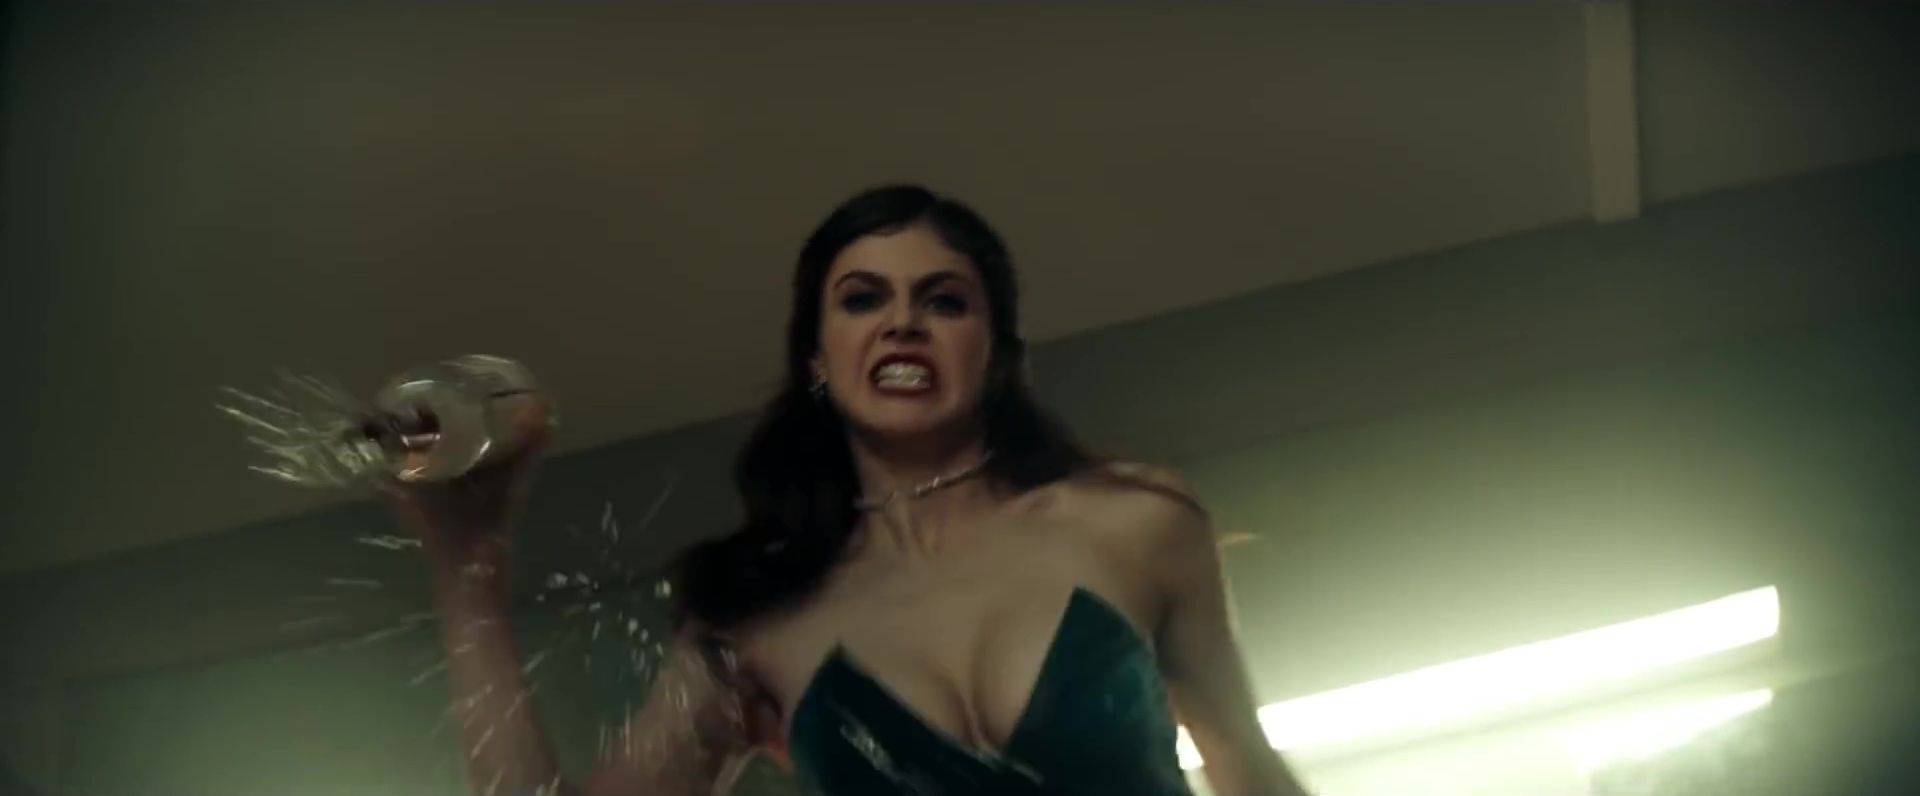 Alexandra Daddario â€“ The Fappening Leaked Photos 2015-2020